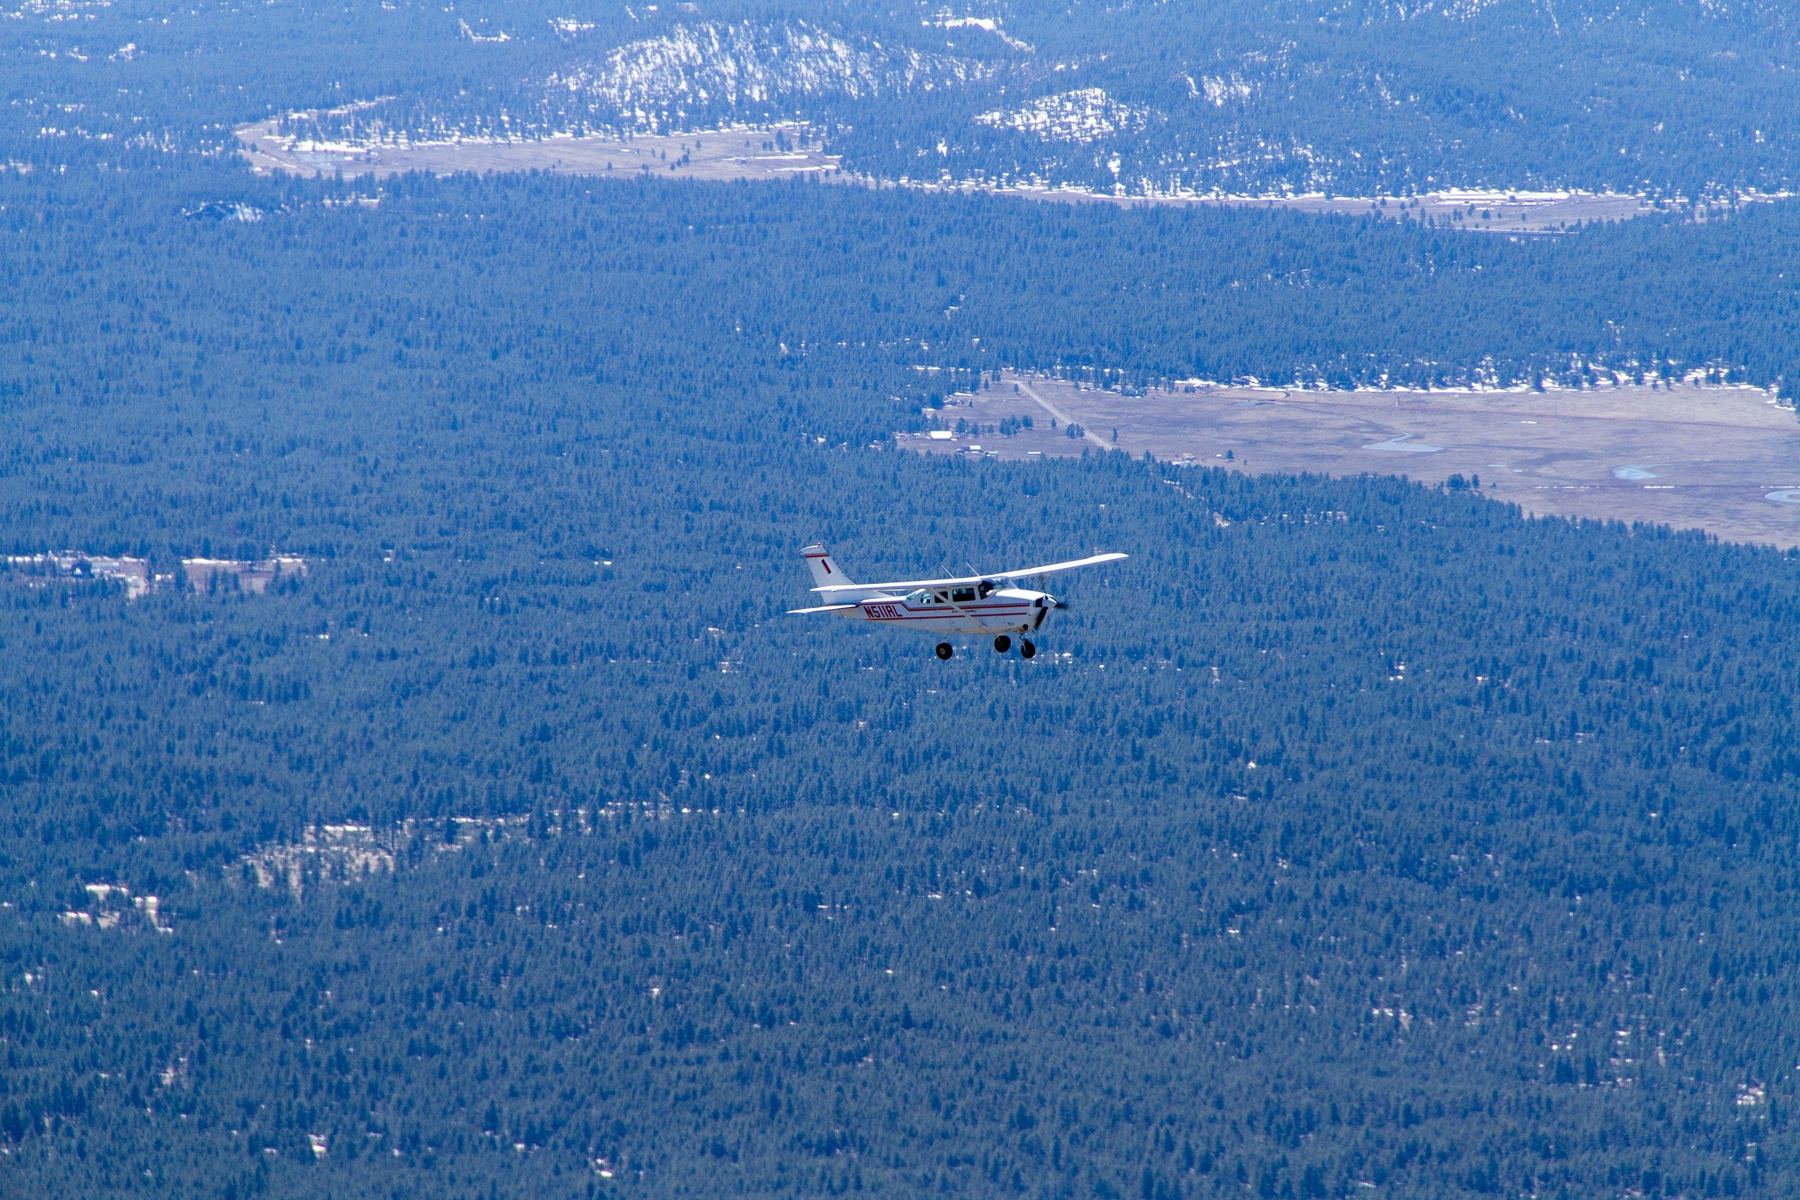 Formation flying past the San Francisco peaks before Steve sped off to Bar-10